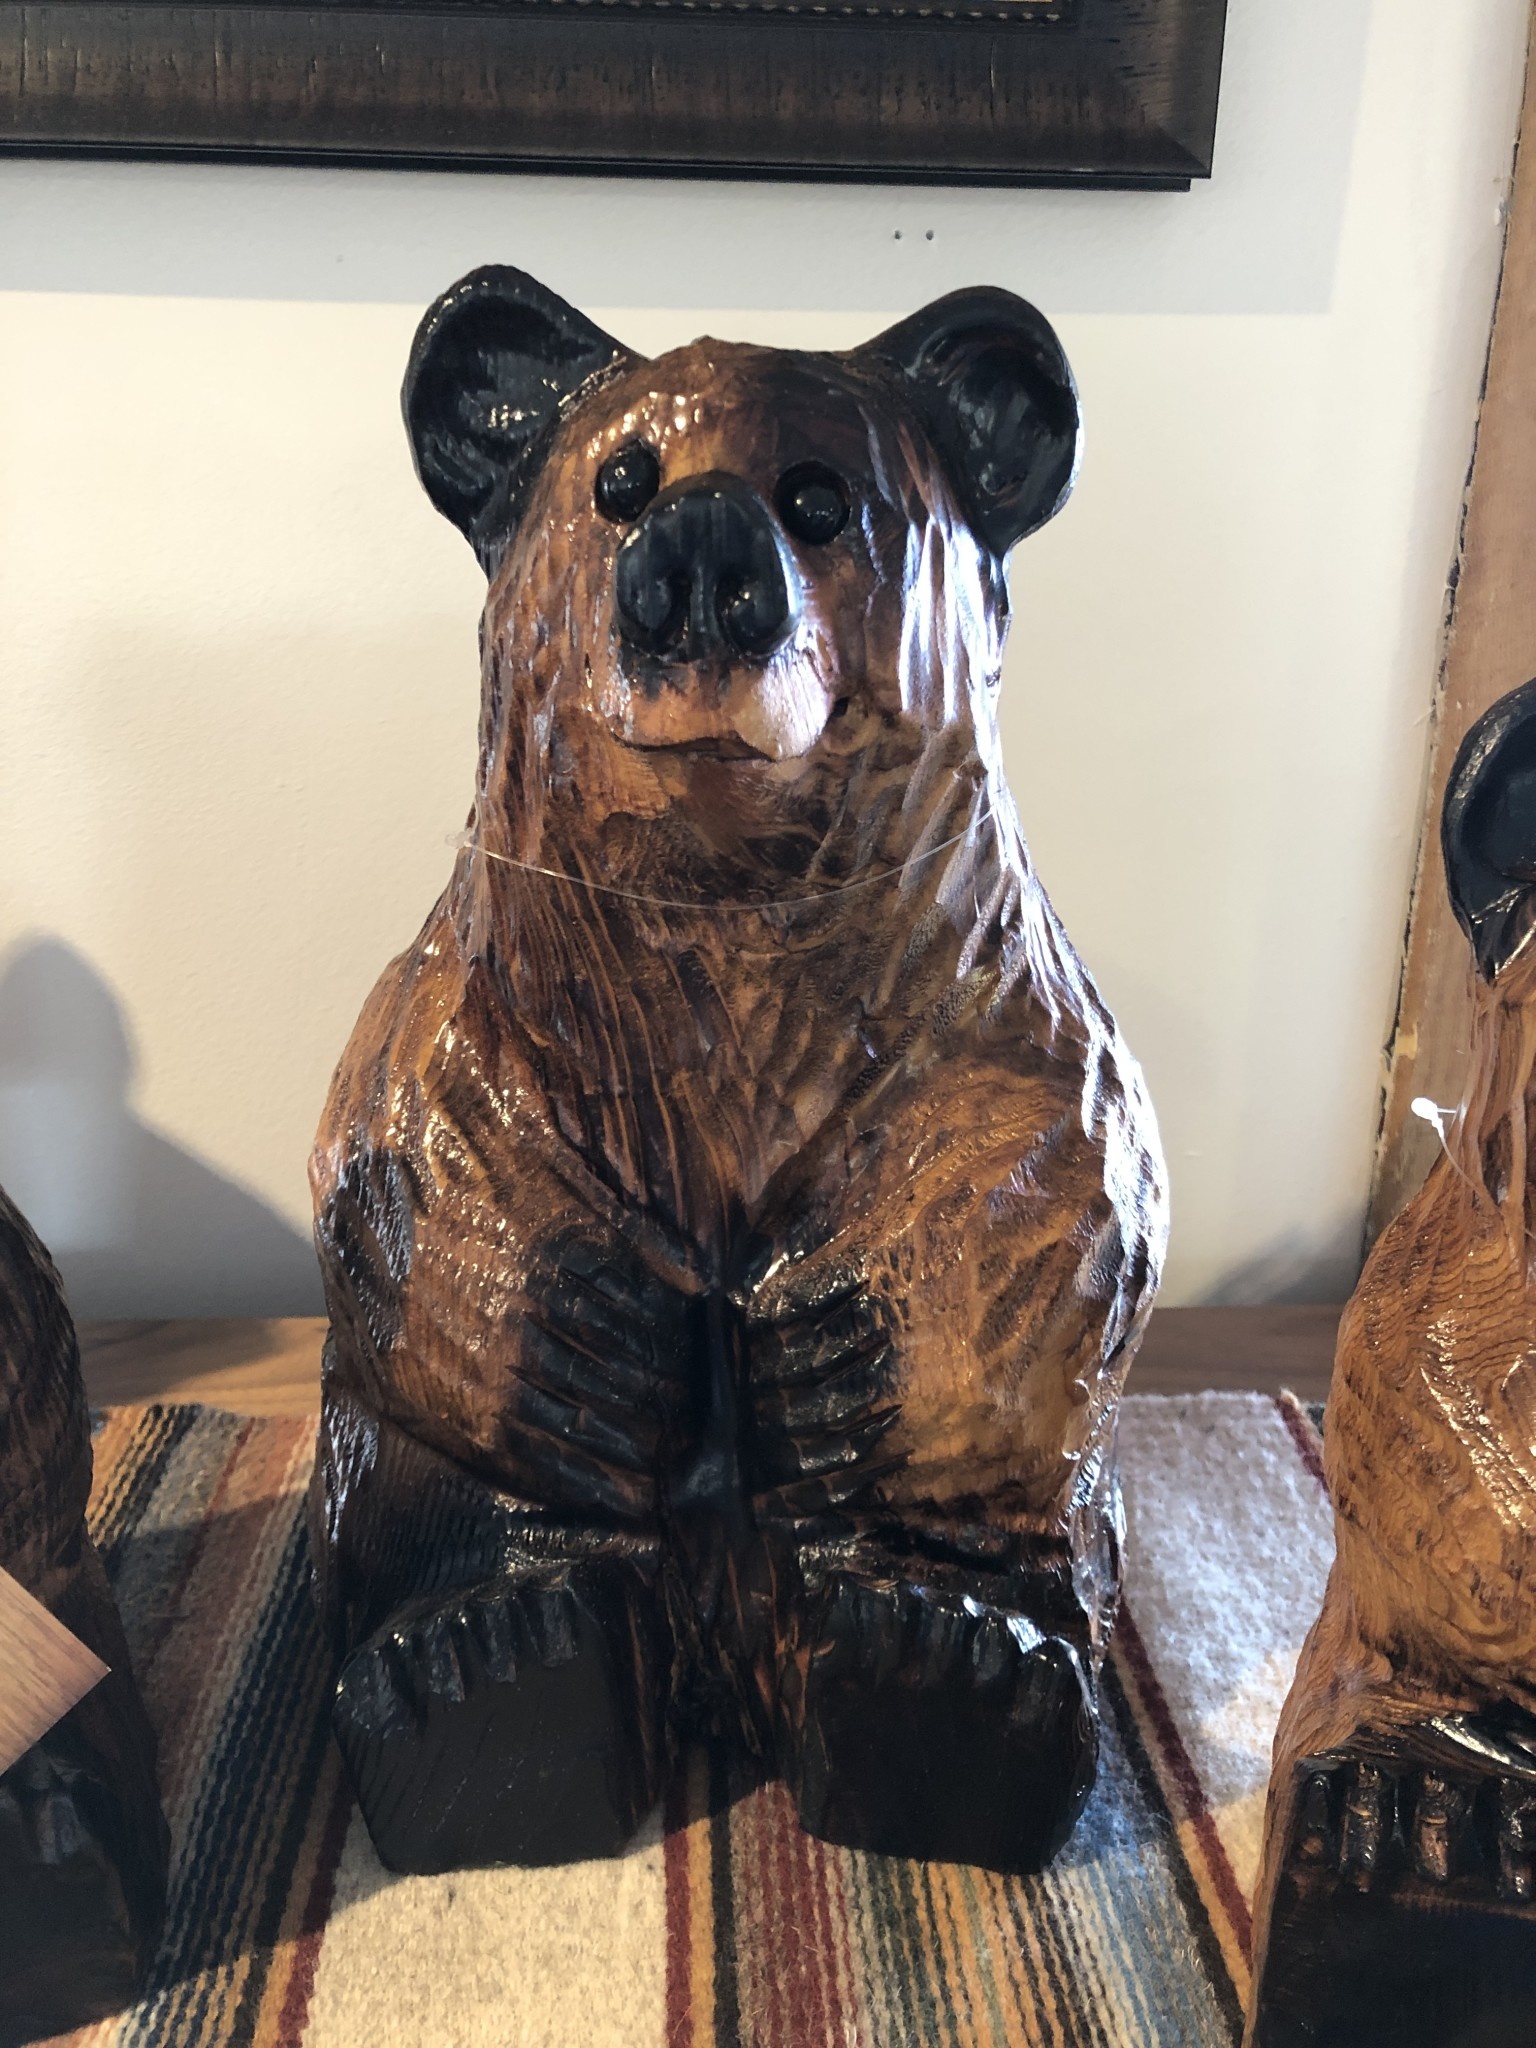 Wood Carving Outlet 15" Sitting Carved Bear